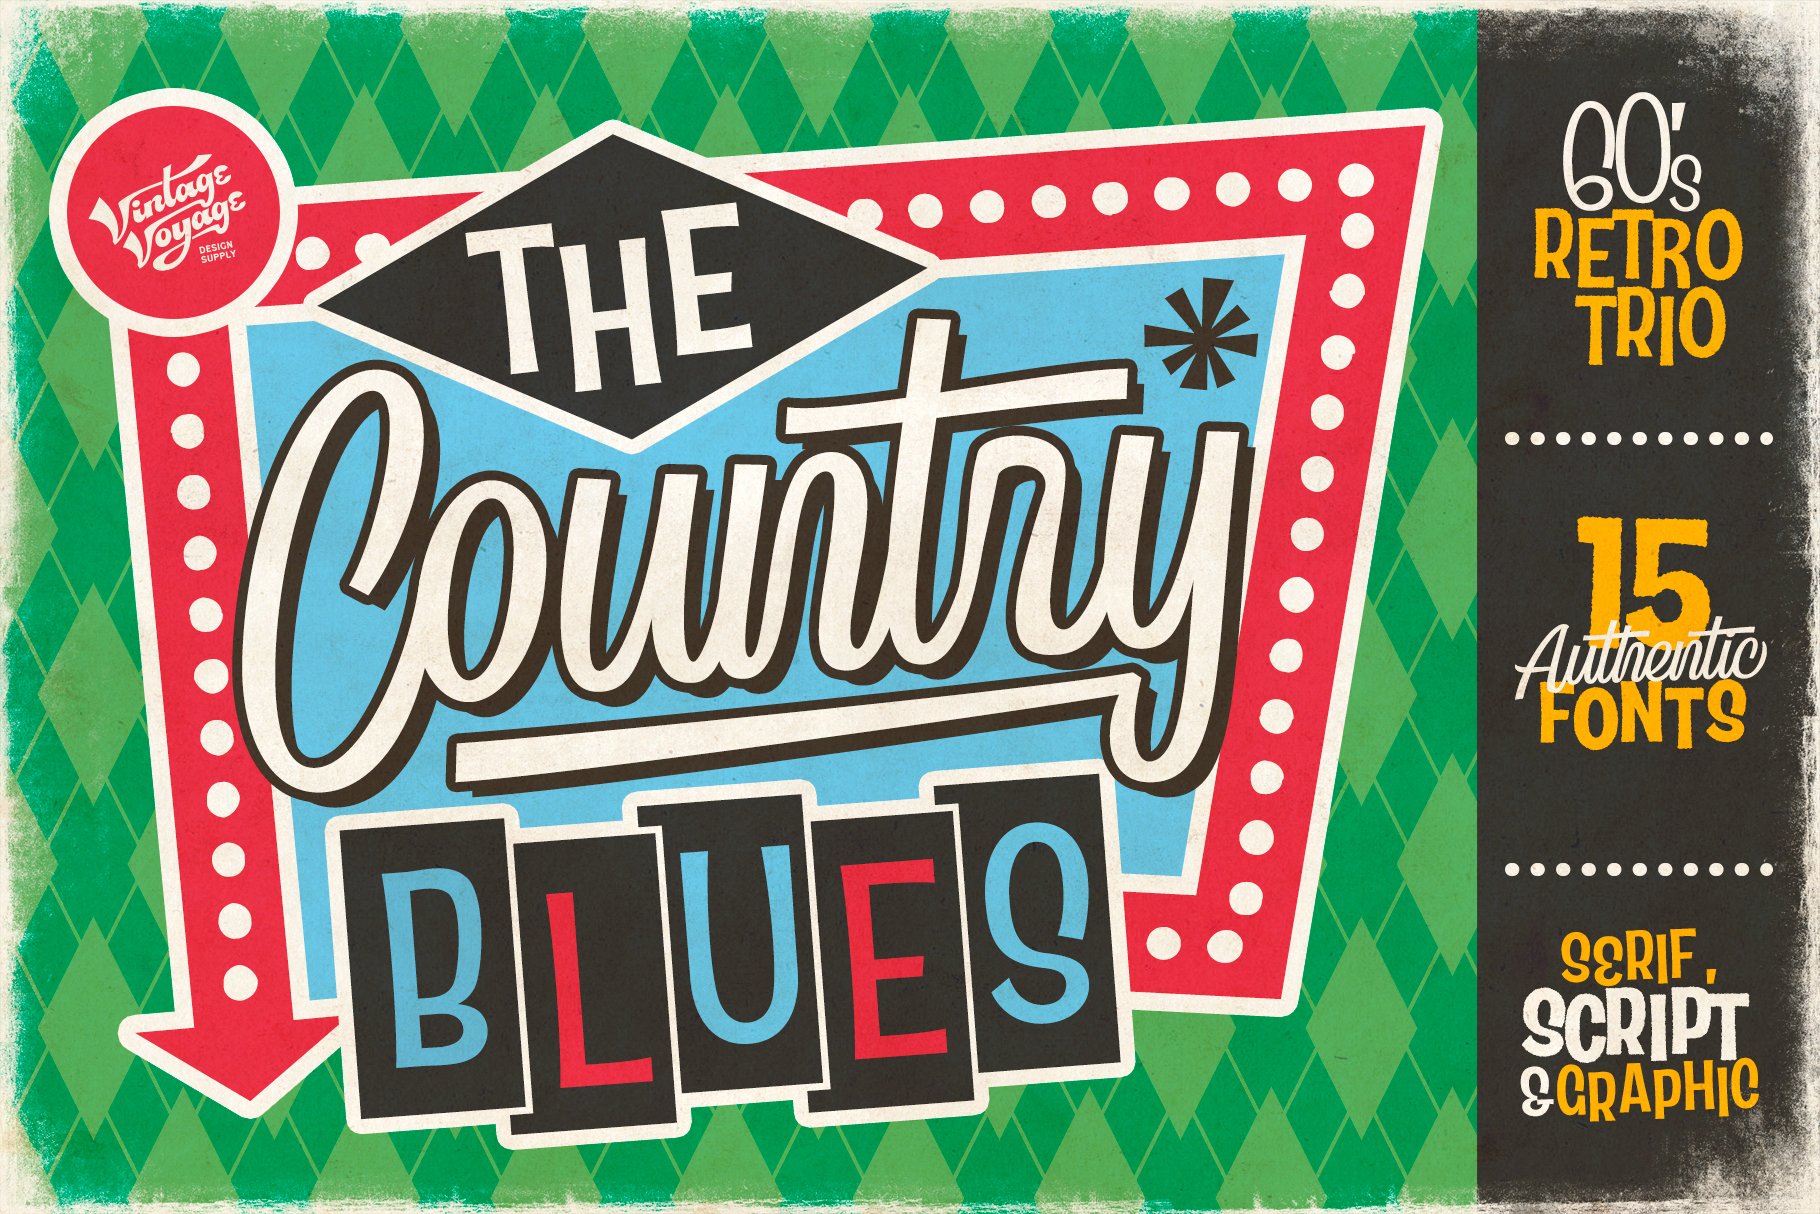 The Country Blues • SALE cover image.